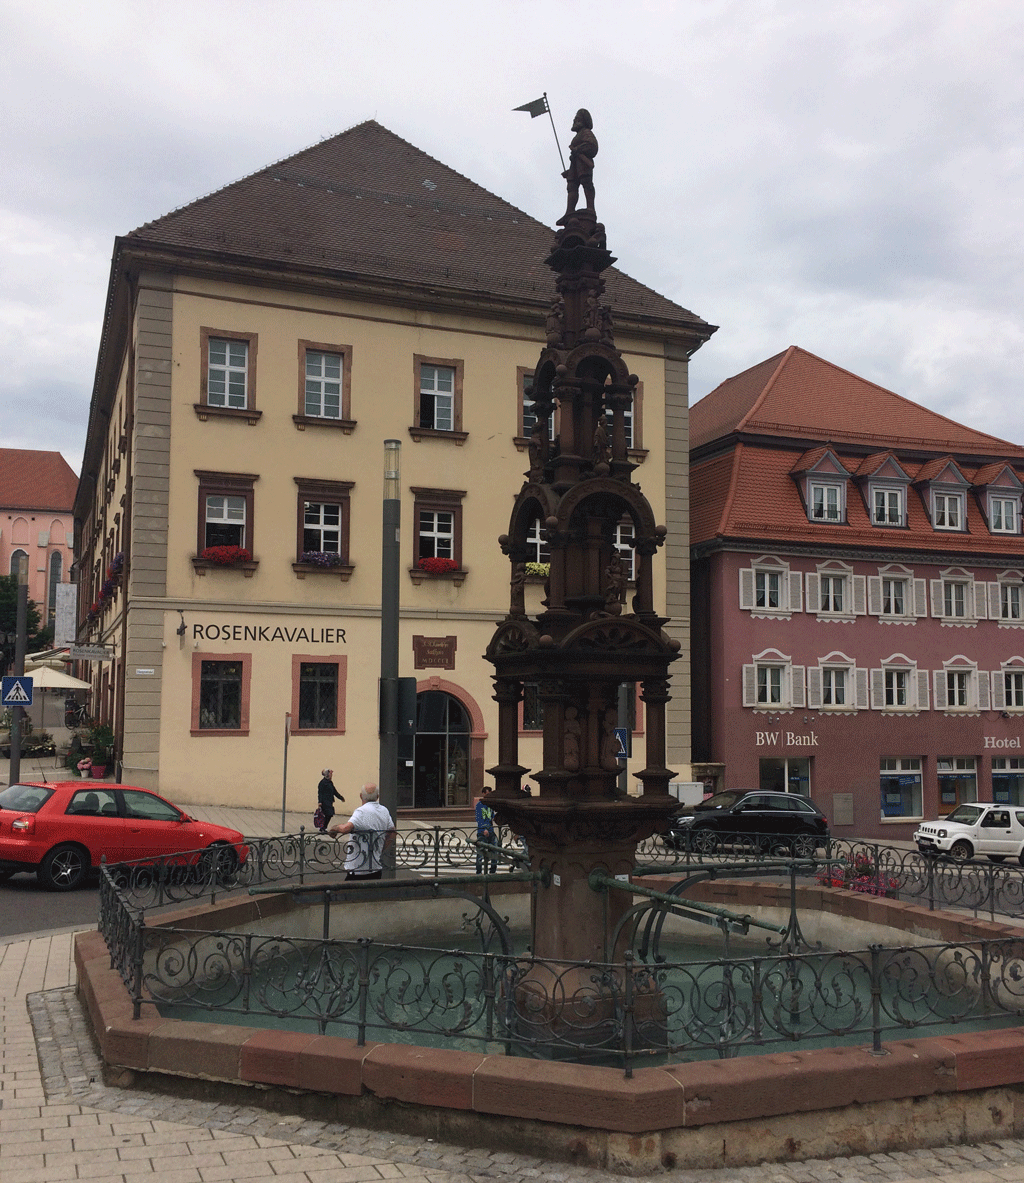 The second fountain in the main street